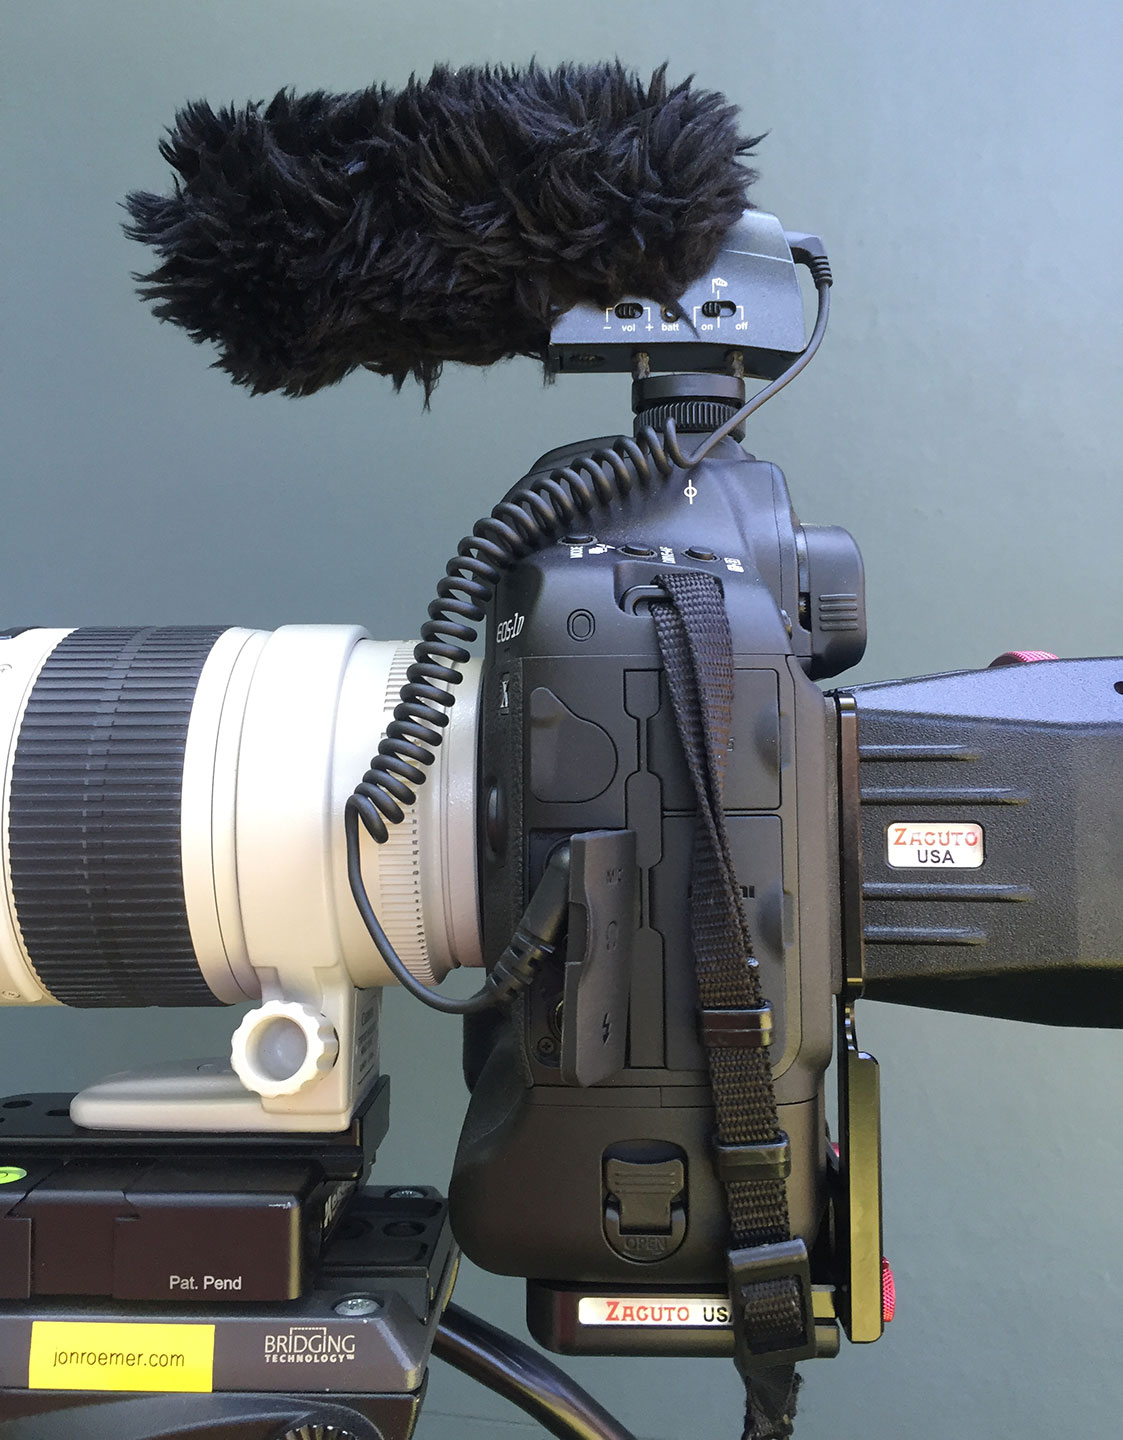 Side view: Canon 1DX Mark II and Zacuto Z-finder on a Manfrotto Monopod.